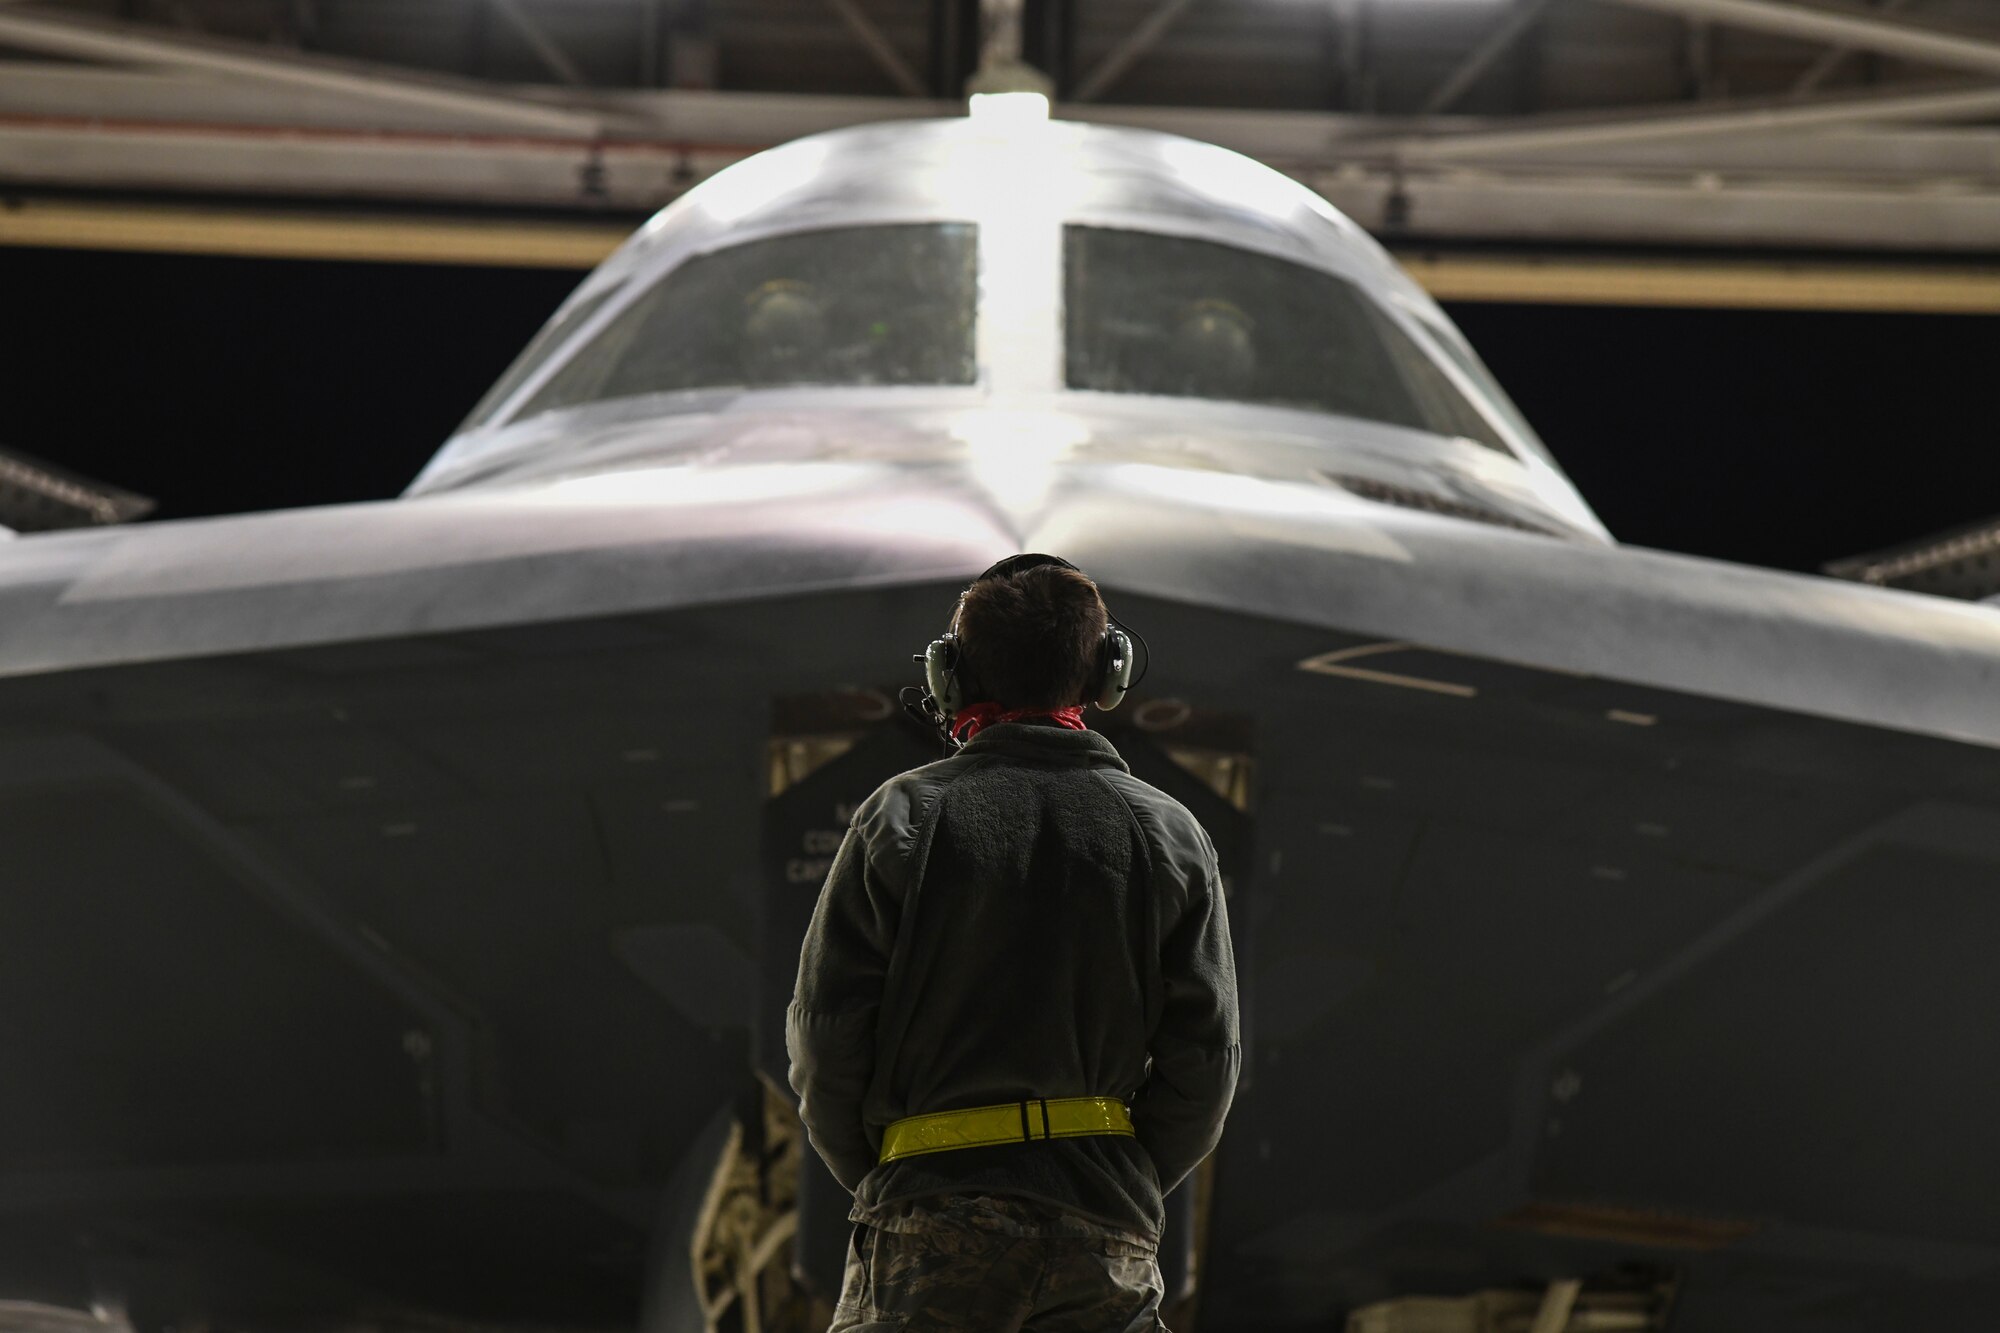 A maintainer assigned to 509th Aircraft Maintenance Squadron prepare a B-2 Spirit Stealth Bomber for take-off in support of U.S. Strategic Command strategic presence operations at Whiteman AFB, Missouri, May 7, 2020. U.S. Strategic Command routinely conducts strategic presence operations across the globe as a demonstration of U.S. commitment to collective defense and to integrate with Geographic Combatant Command operations and activities. These missions also familiarize aircrews with air bases, procedures, and operations in different Geographic Combatant Commands areas of operations.